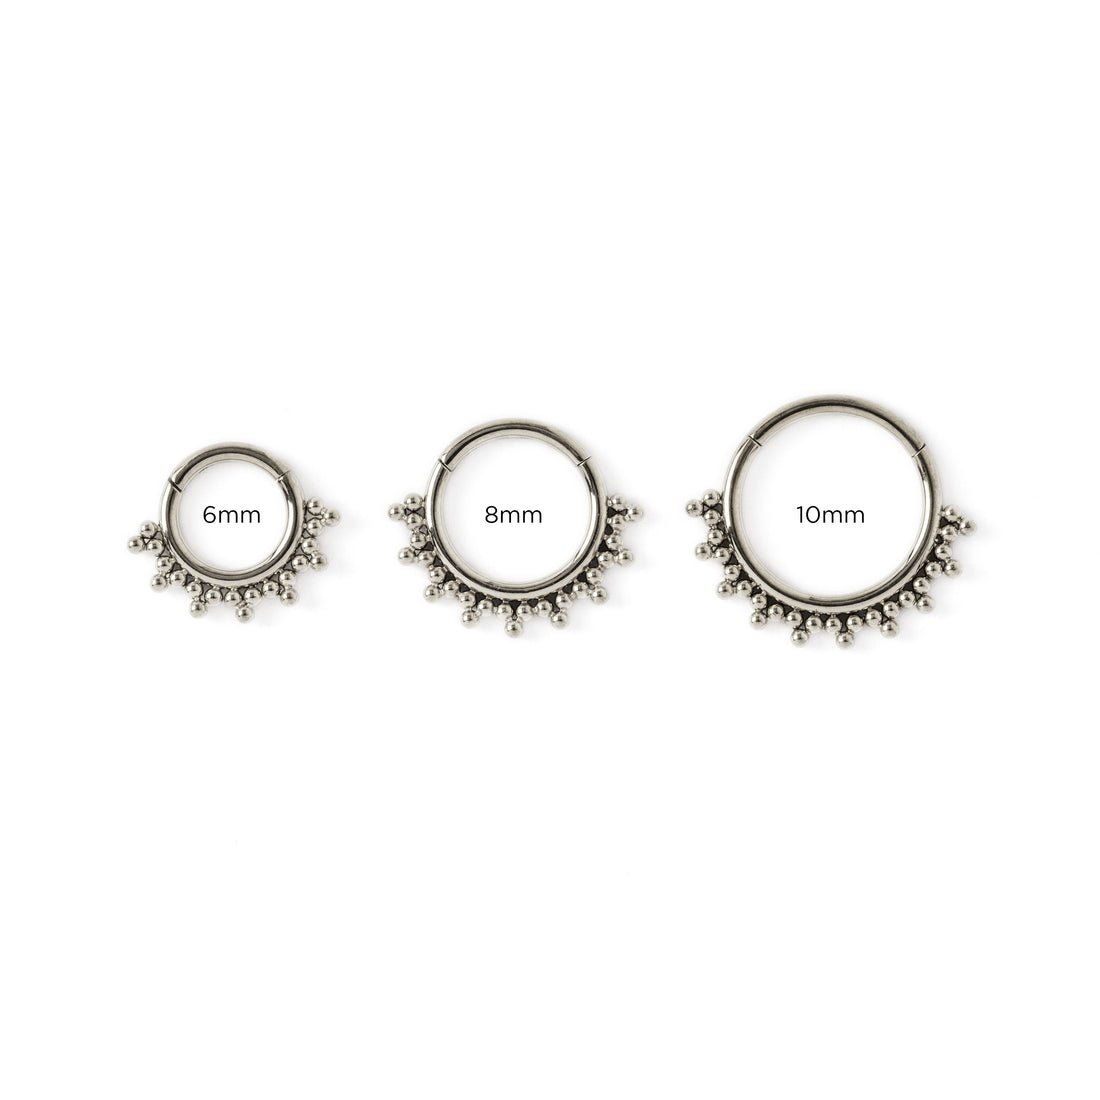 6mm, 8mm, 10mm Sarika surgical steel septum clickers frontal view